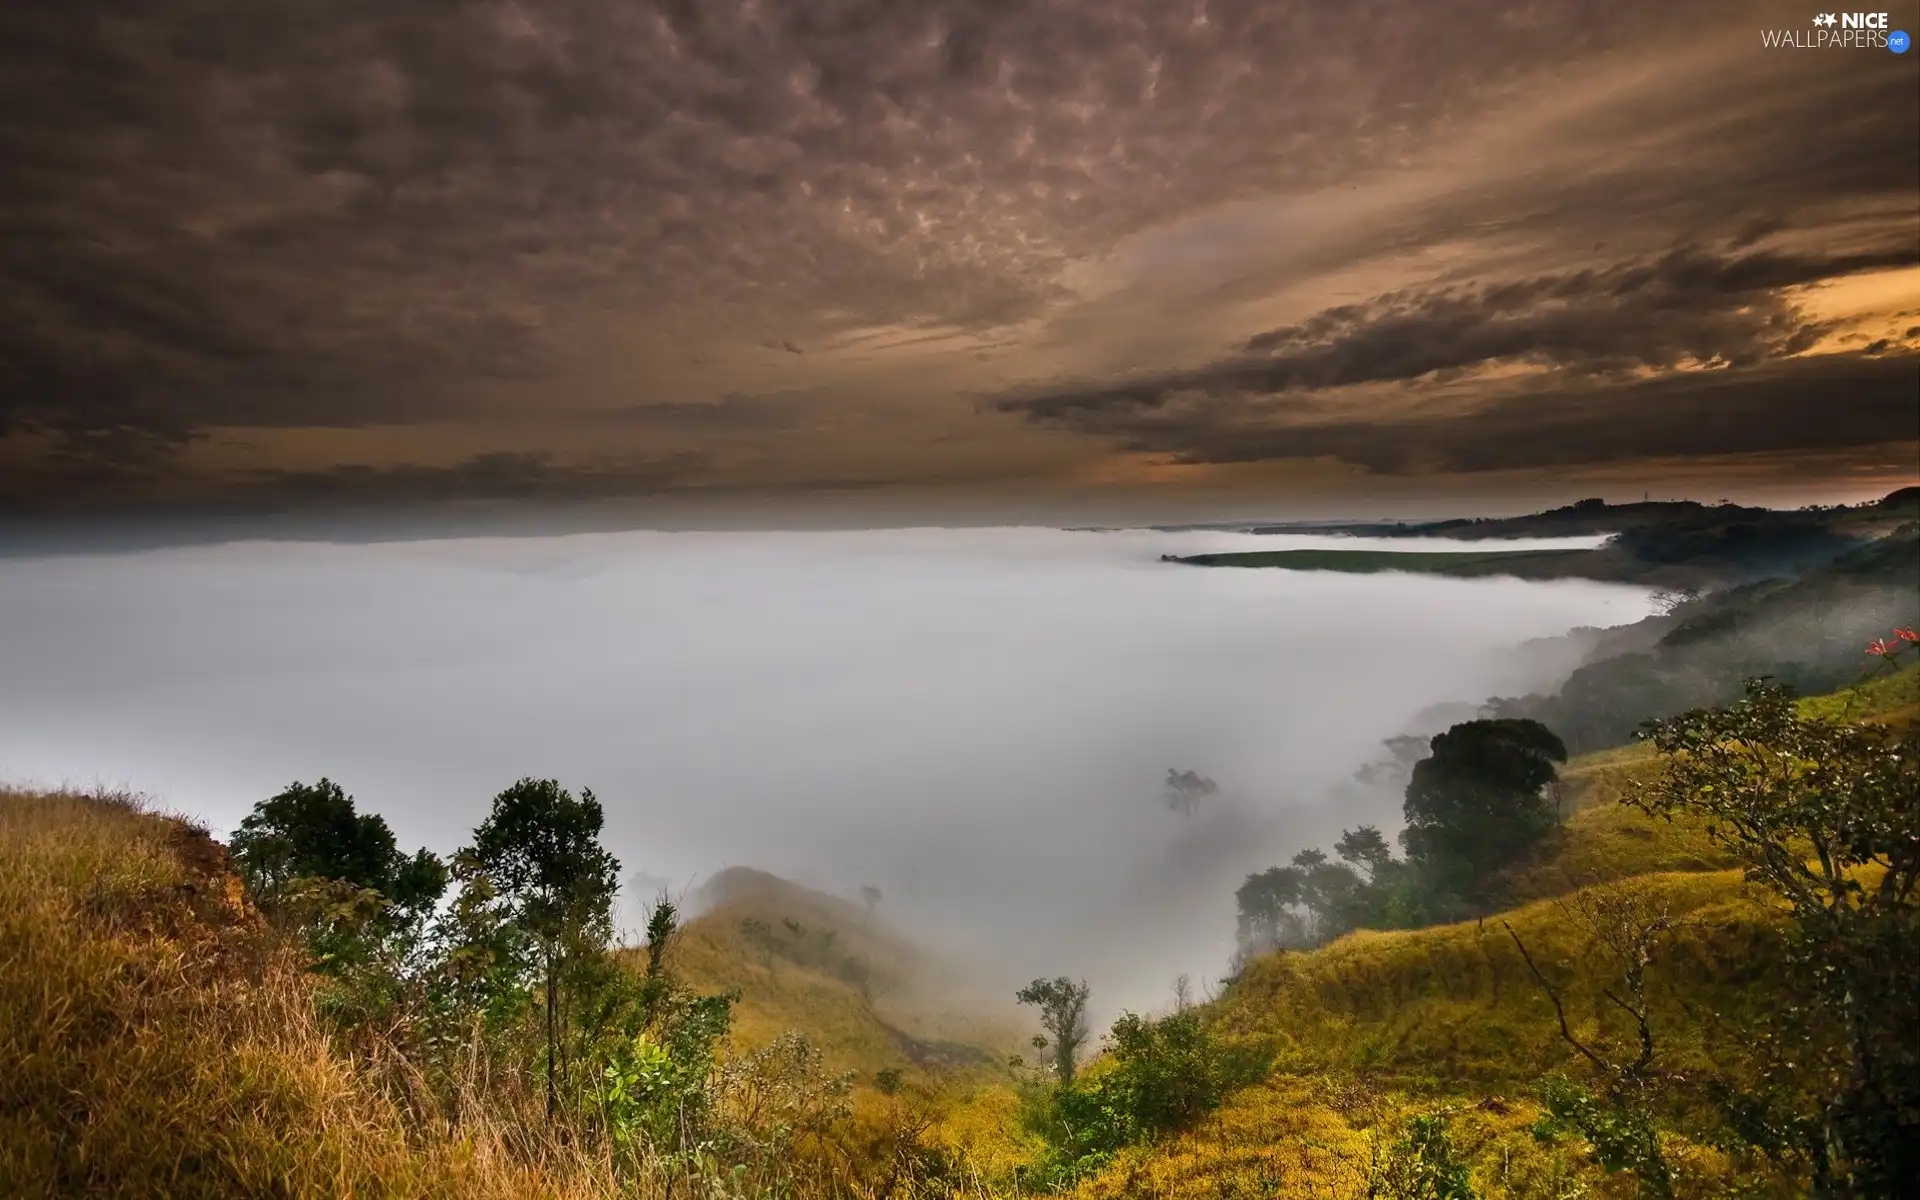 trees, viewes, Fog, Valley, Clouds